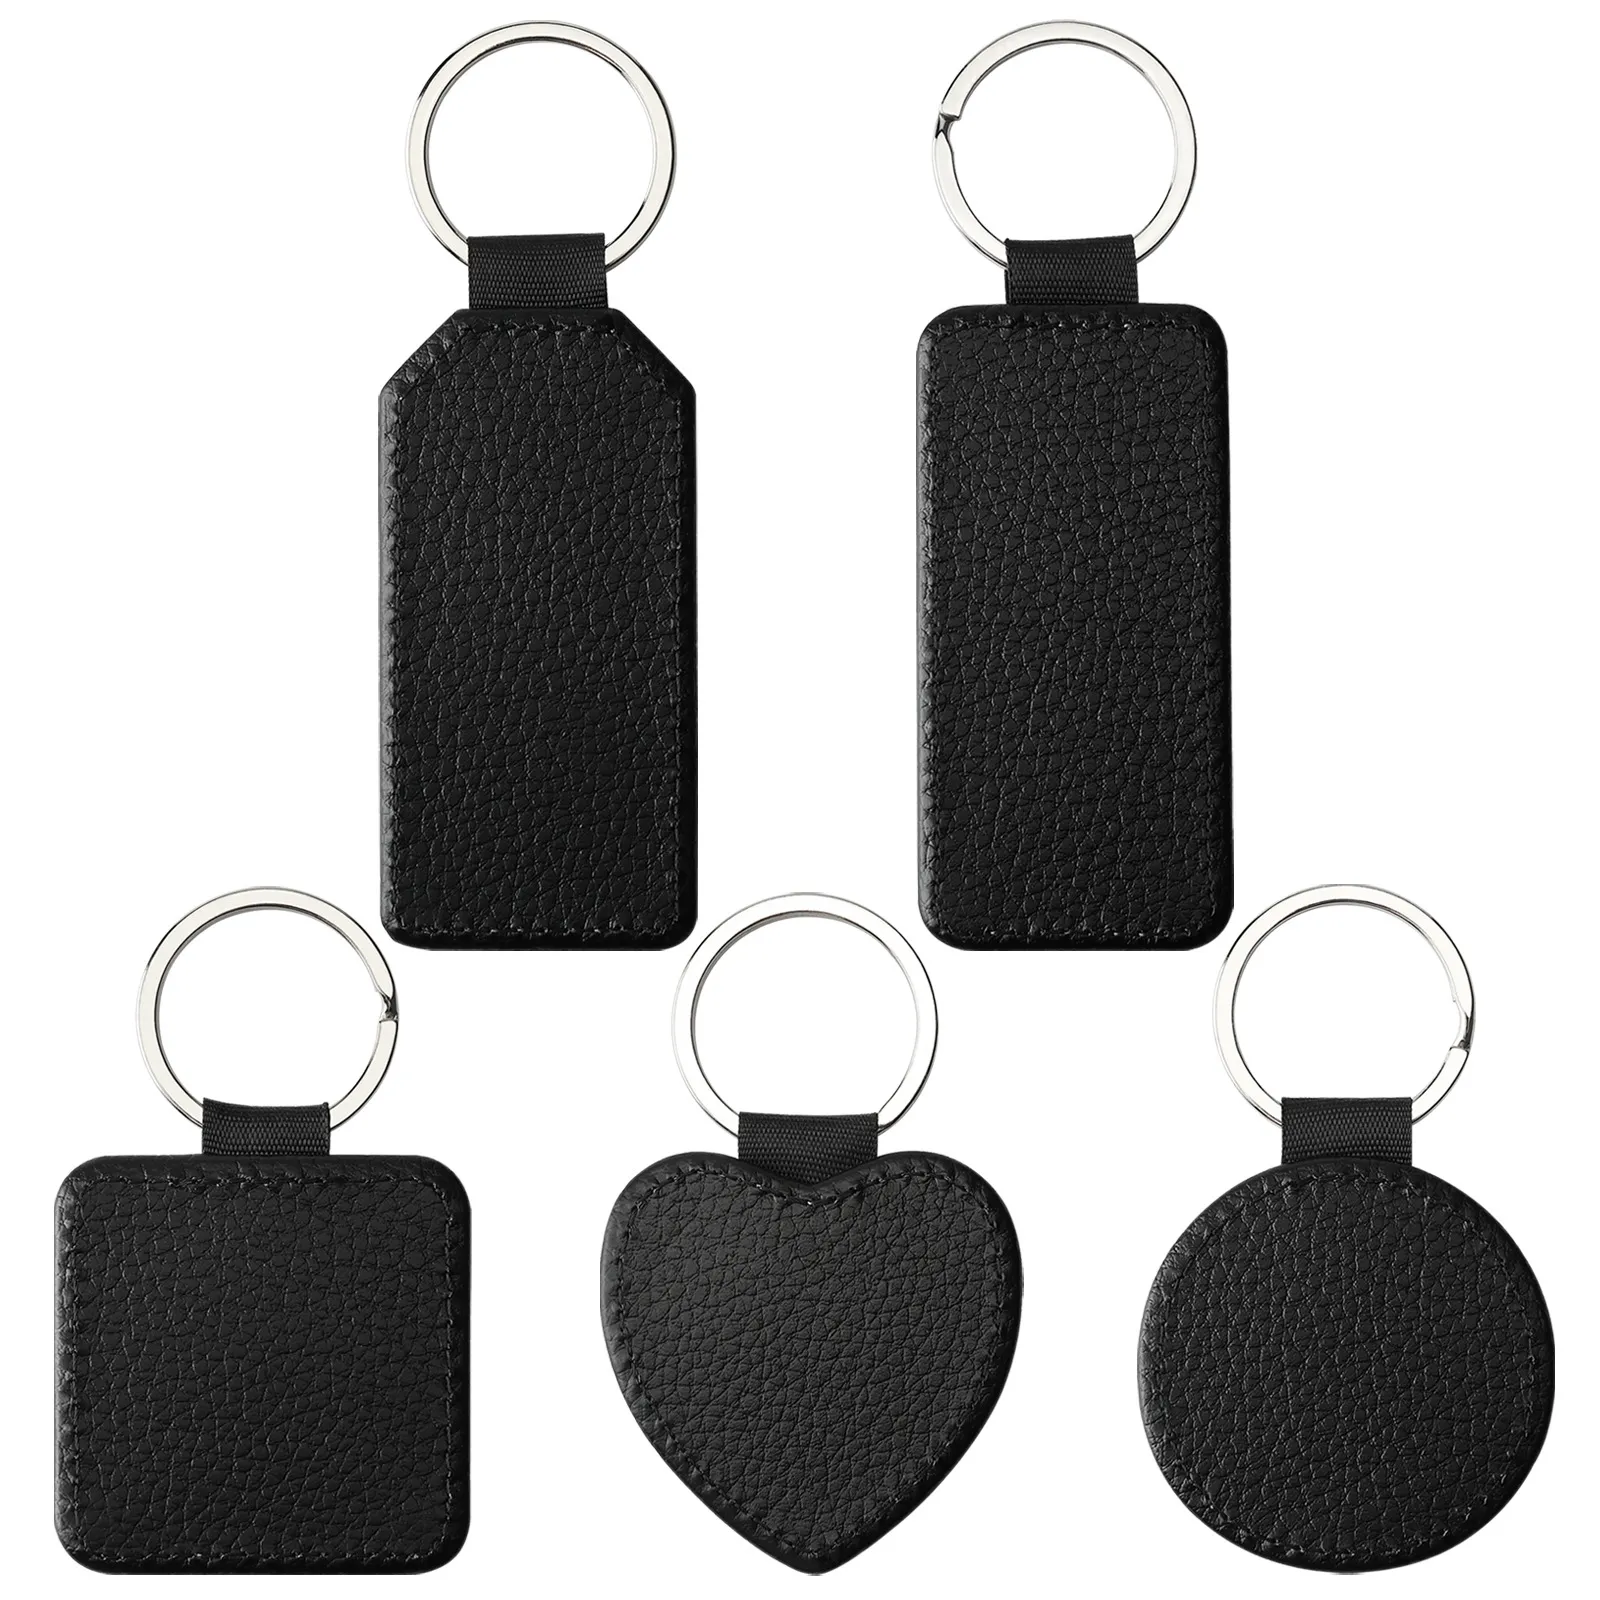 blanksub_006store DIY Sublimation PU Leather Keychain in Black and White with Heart Shape Leather Pendant